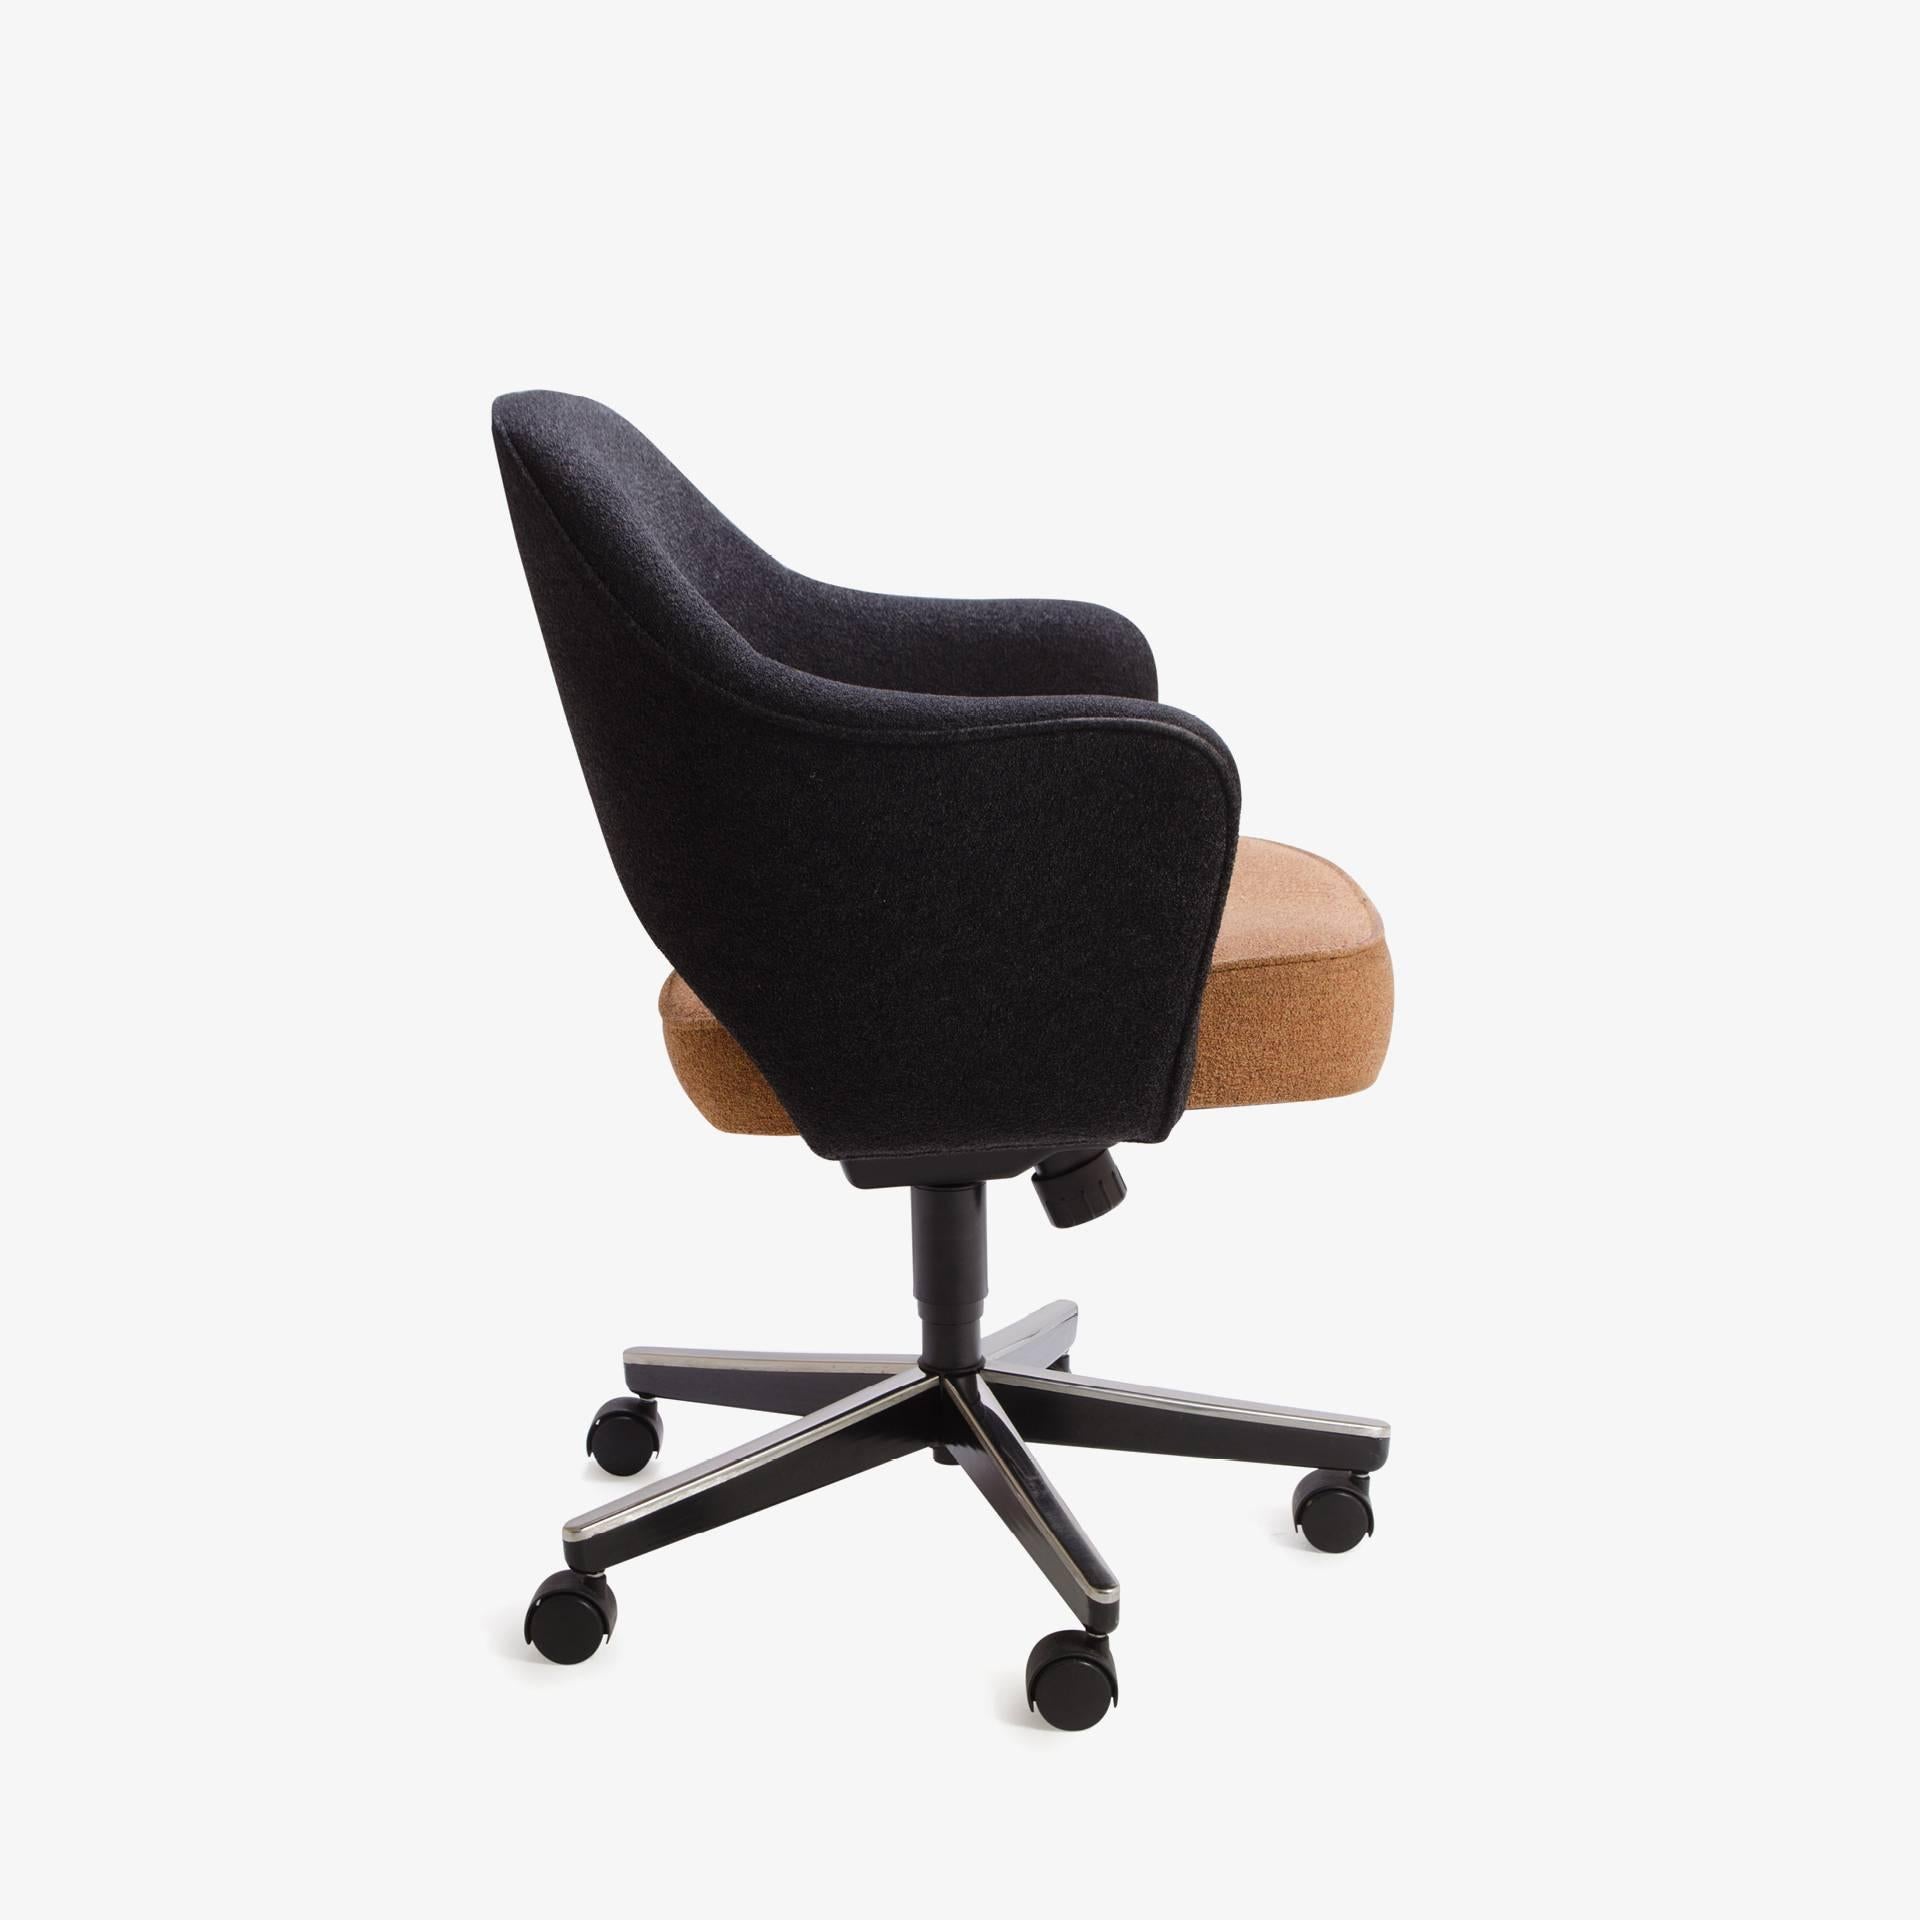 Eero Saarinen for Knoll Executive armchairs (set of six), amazing additions to an office with style. These are contemporary examples of this design, maintaining its original two-tone Knoll bouclé upholstery. We have a large stock of these chairs and